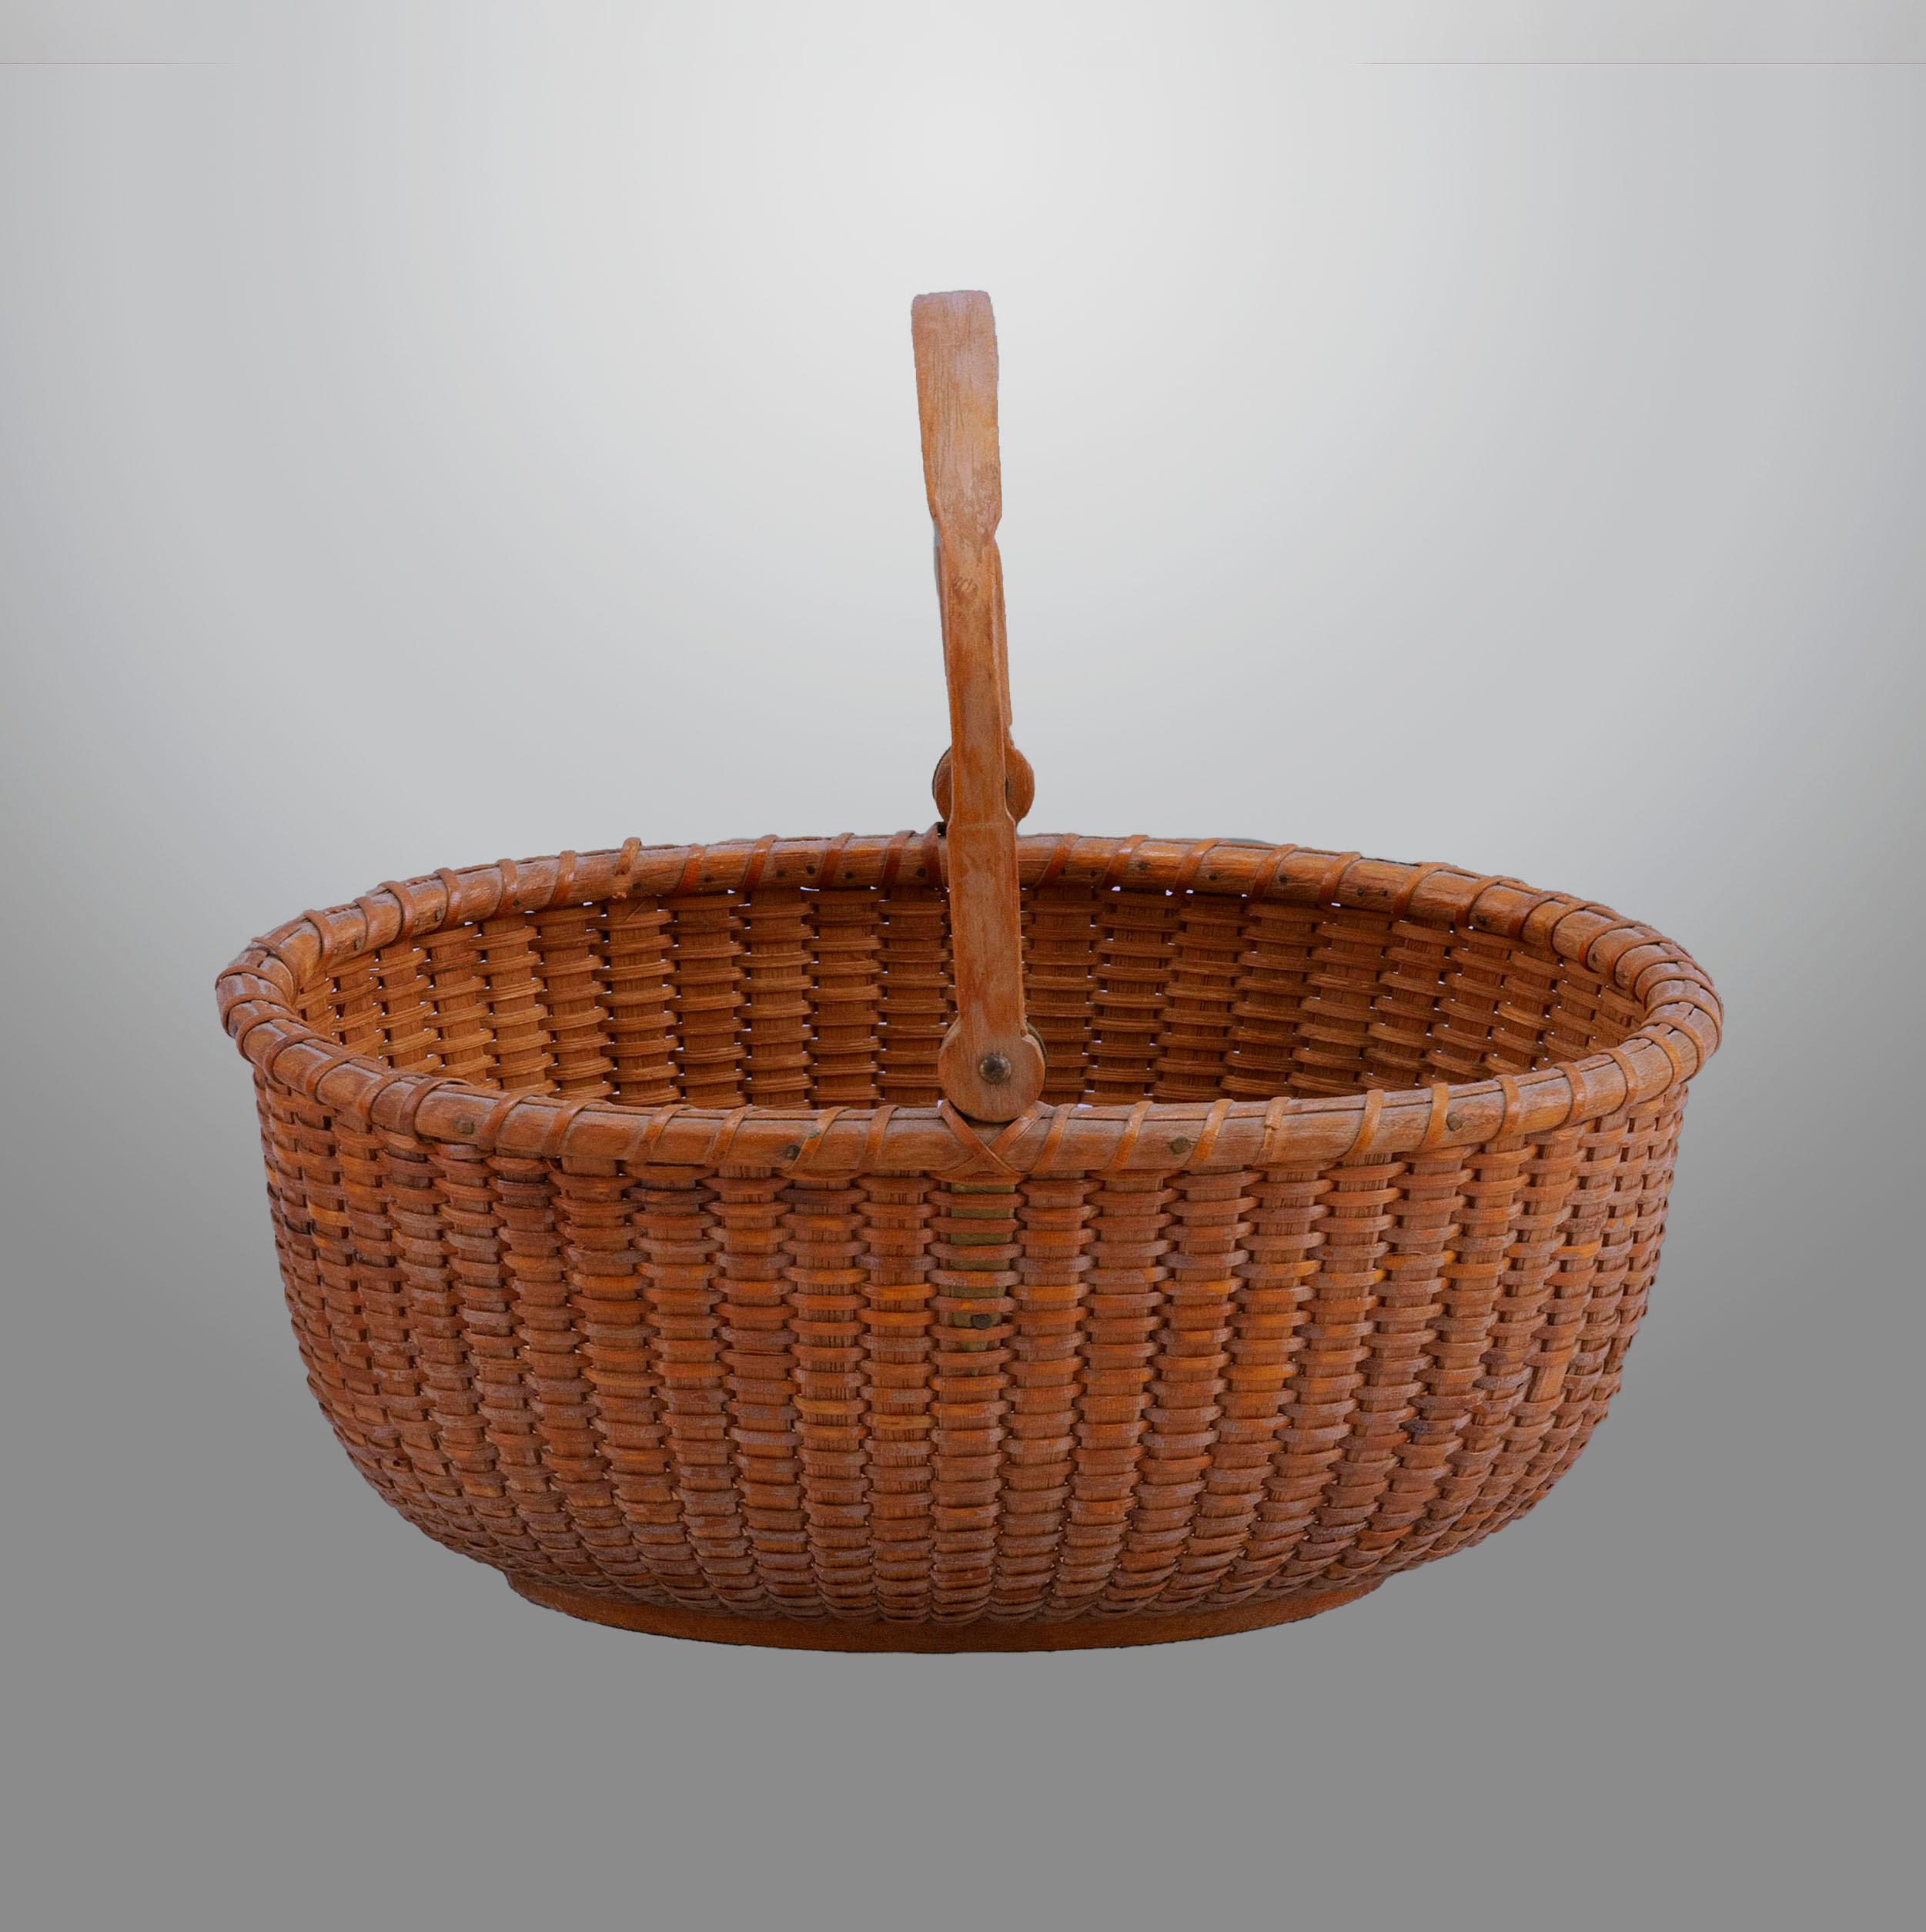 Oval Nantucket lightship basket with shaped oak swing handle
ending in carved round “lollipop” ends and brass ears. Remnants of
the original paper label remains on the bottom. Made by Davis
Hall (1929-1906), circa 1875
133. Measures: 6 ¼”. 